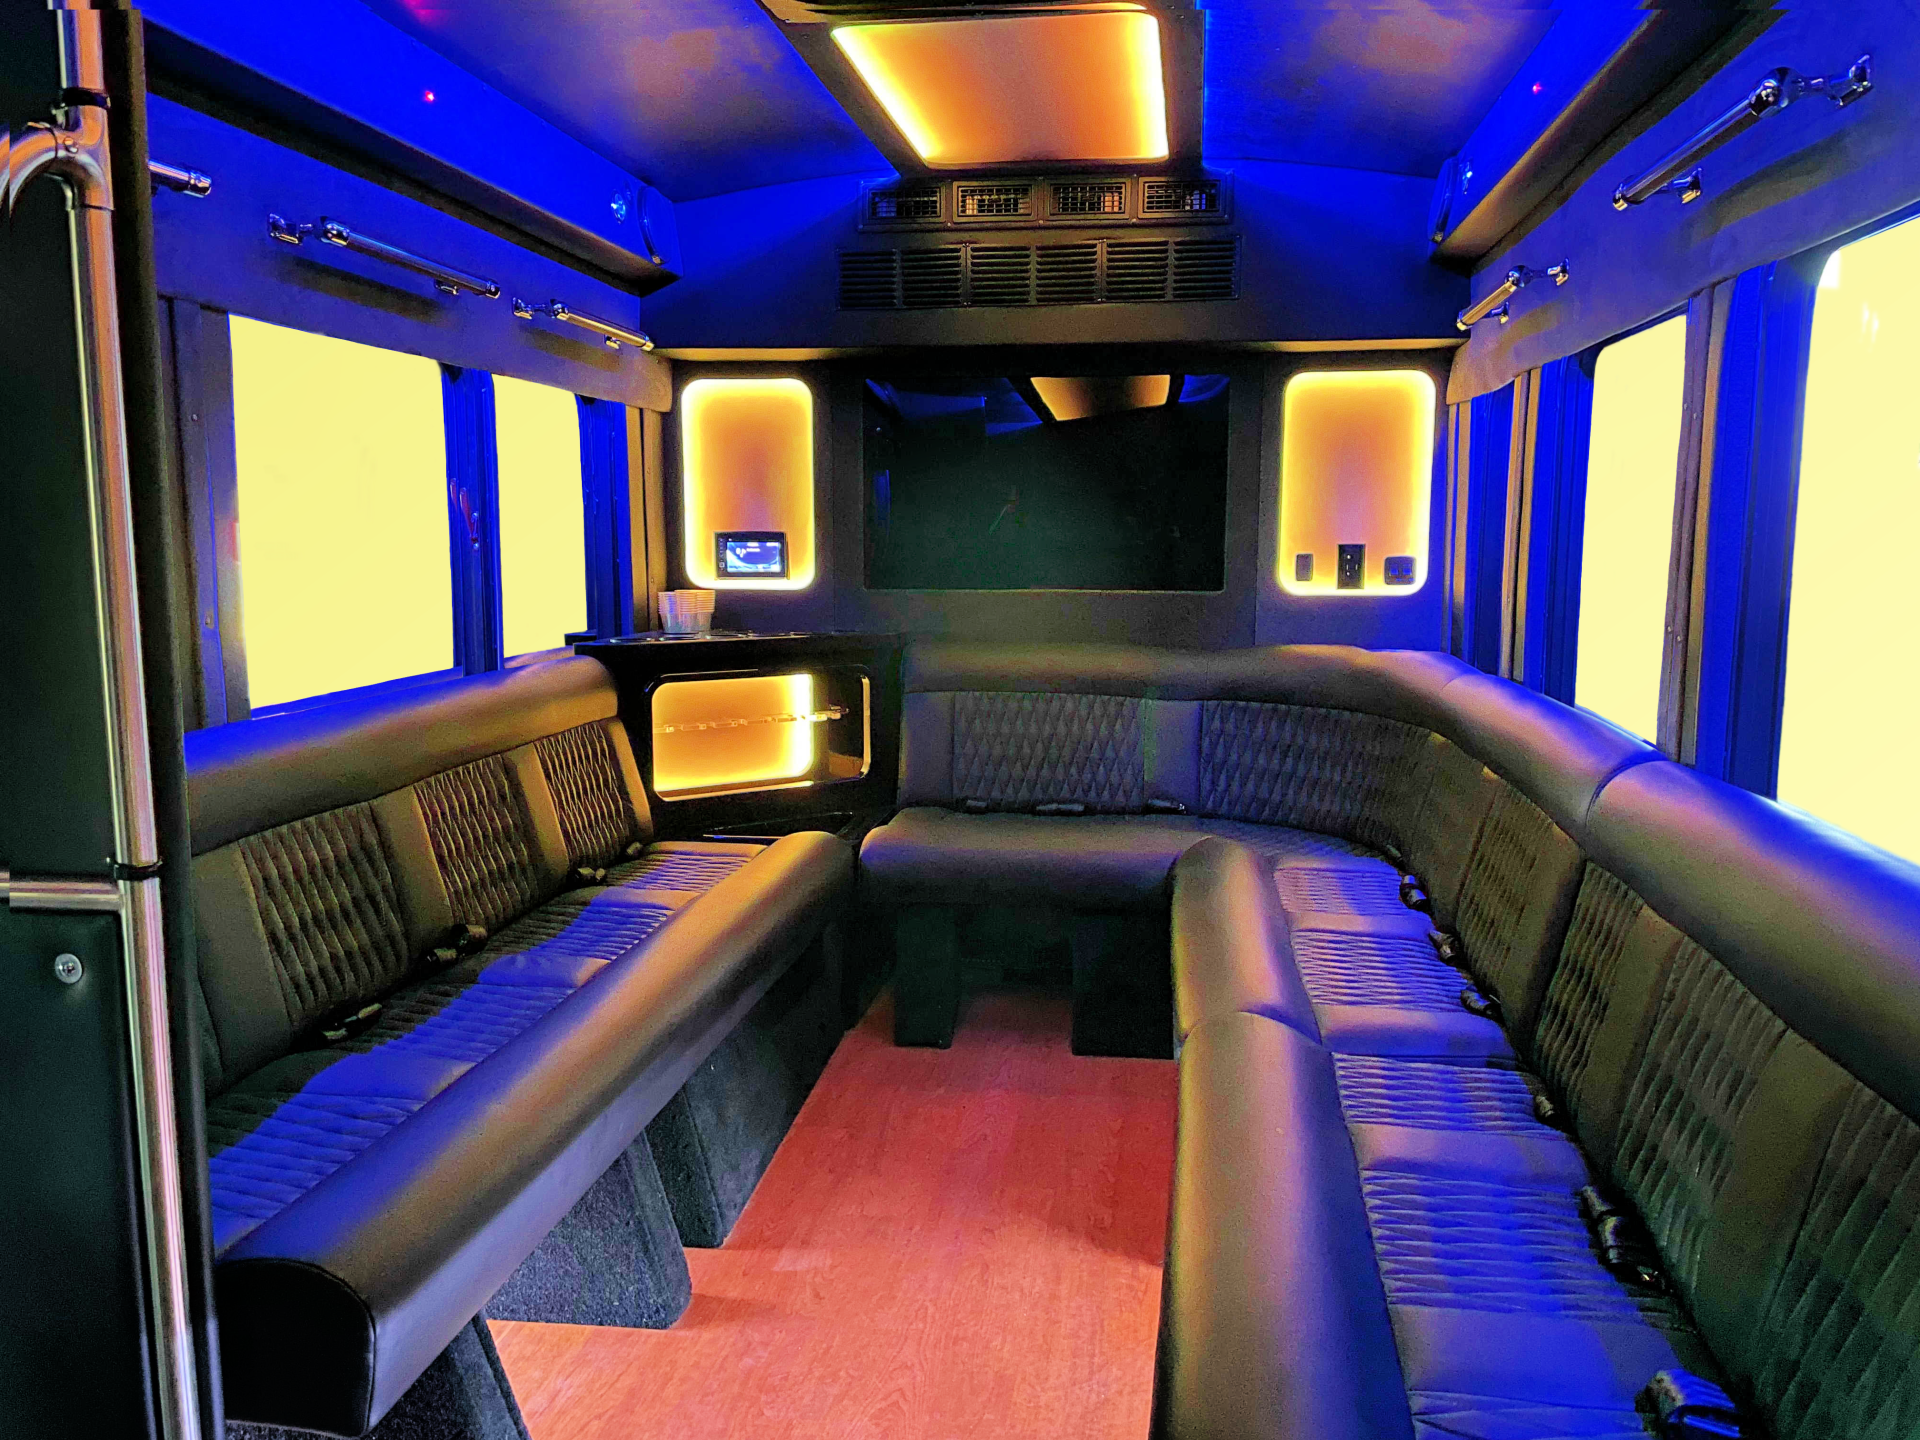 the inside of Battisti party bus with gold LED lights on the ceiling